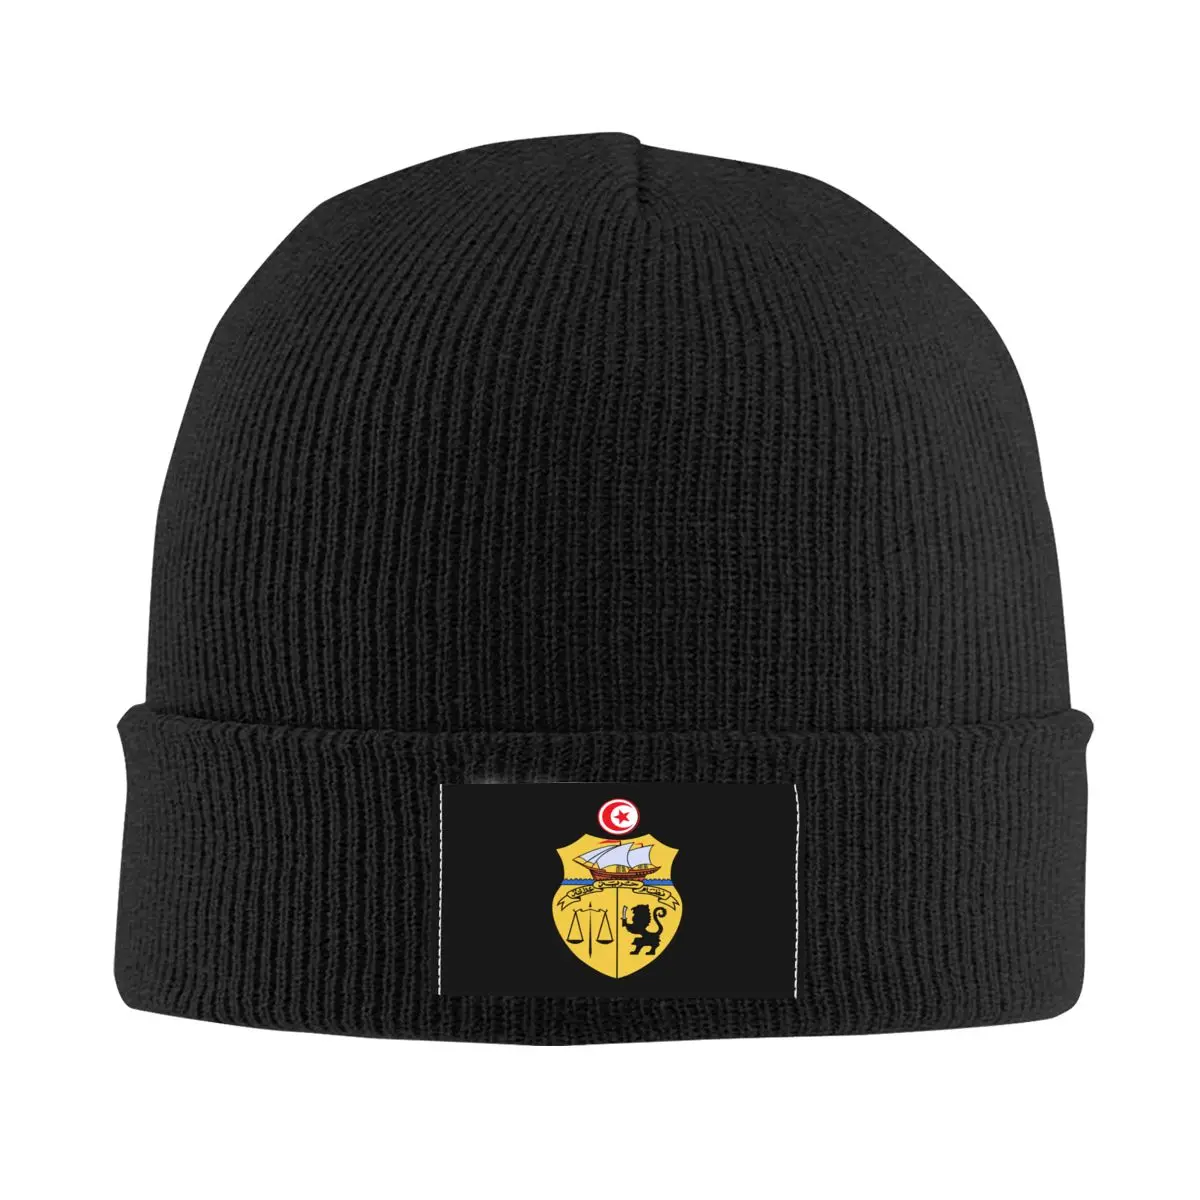 

Coat Of Arms Of Tunisia Bonnet Hats Fashion Knitted Hat For Women Men Warm Winter Skullies Beanies Caps